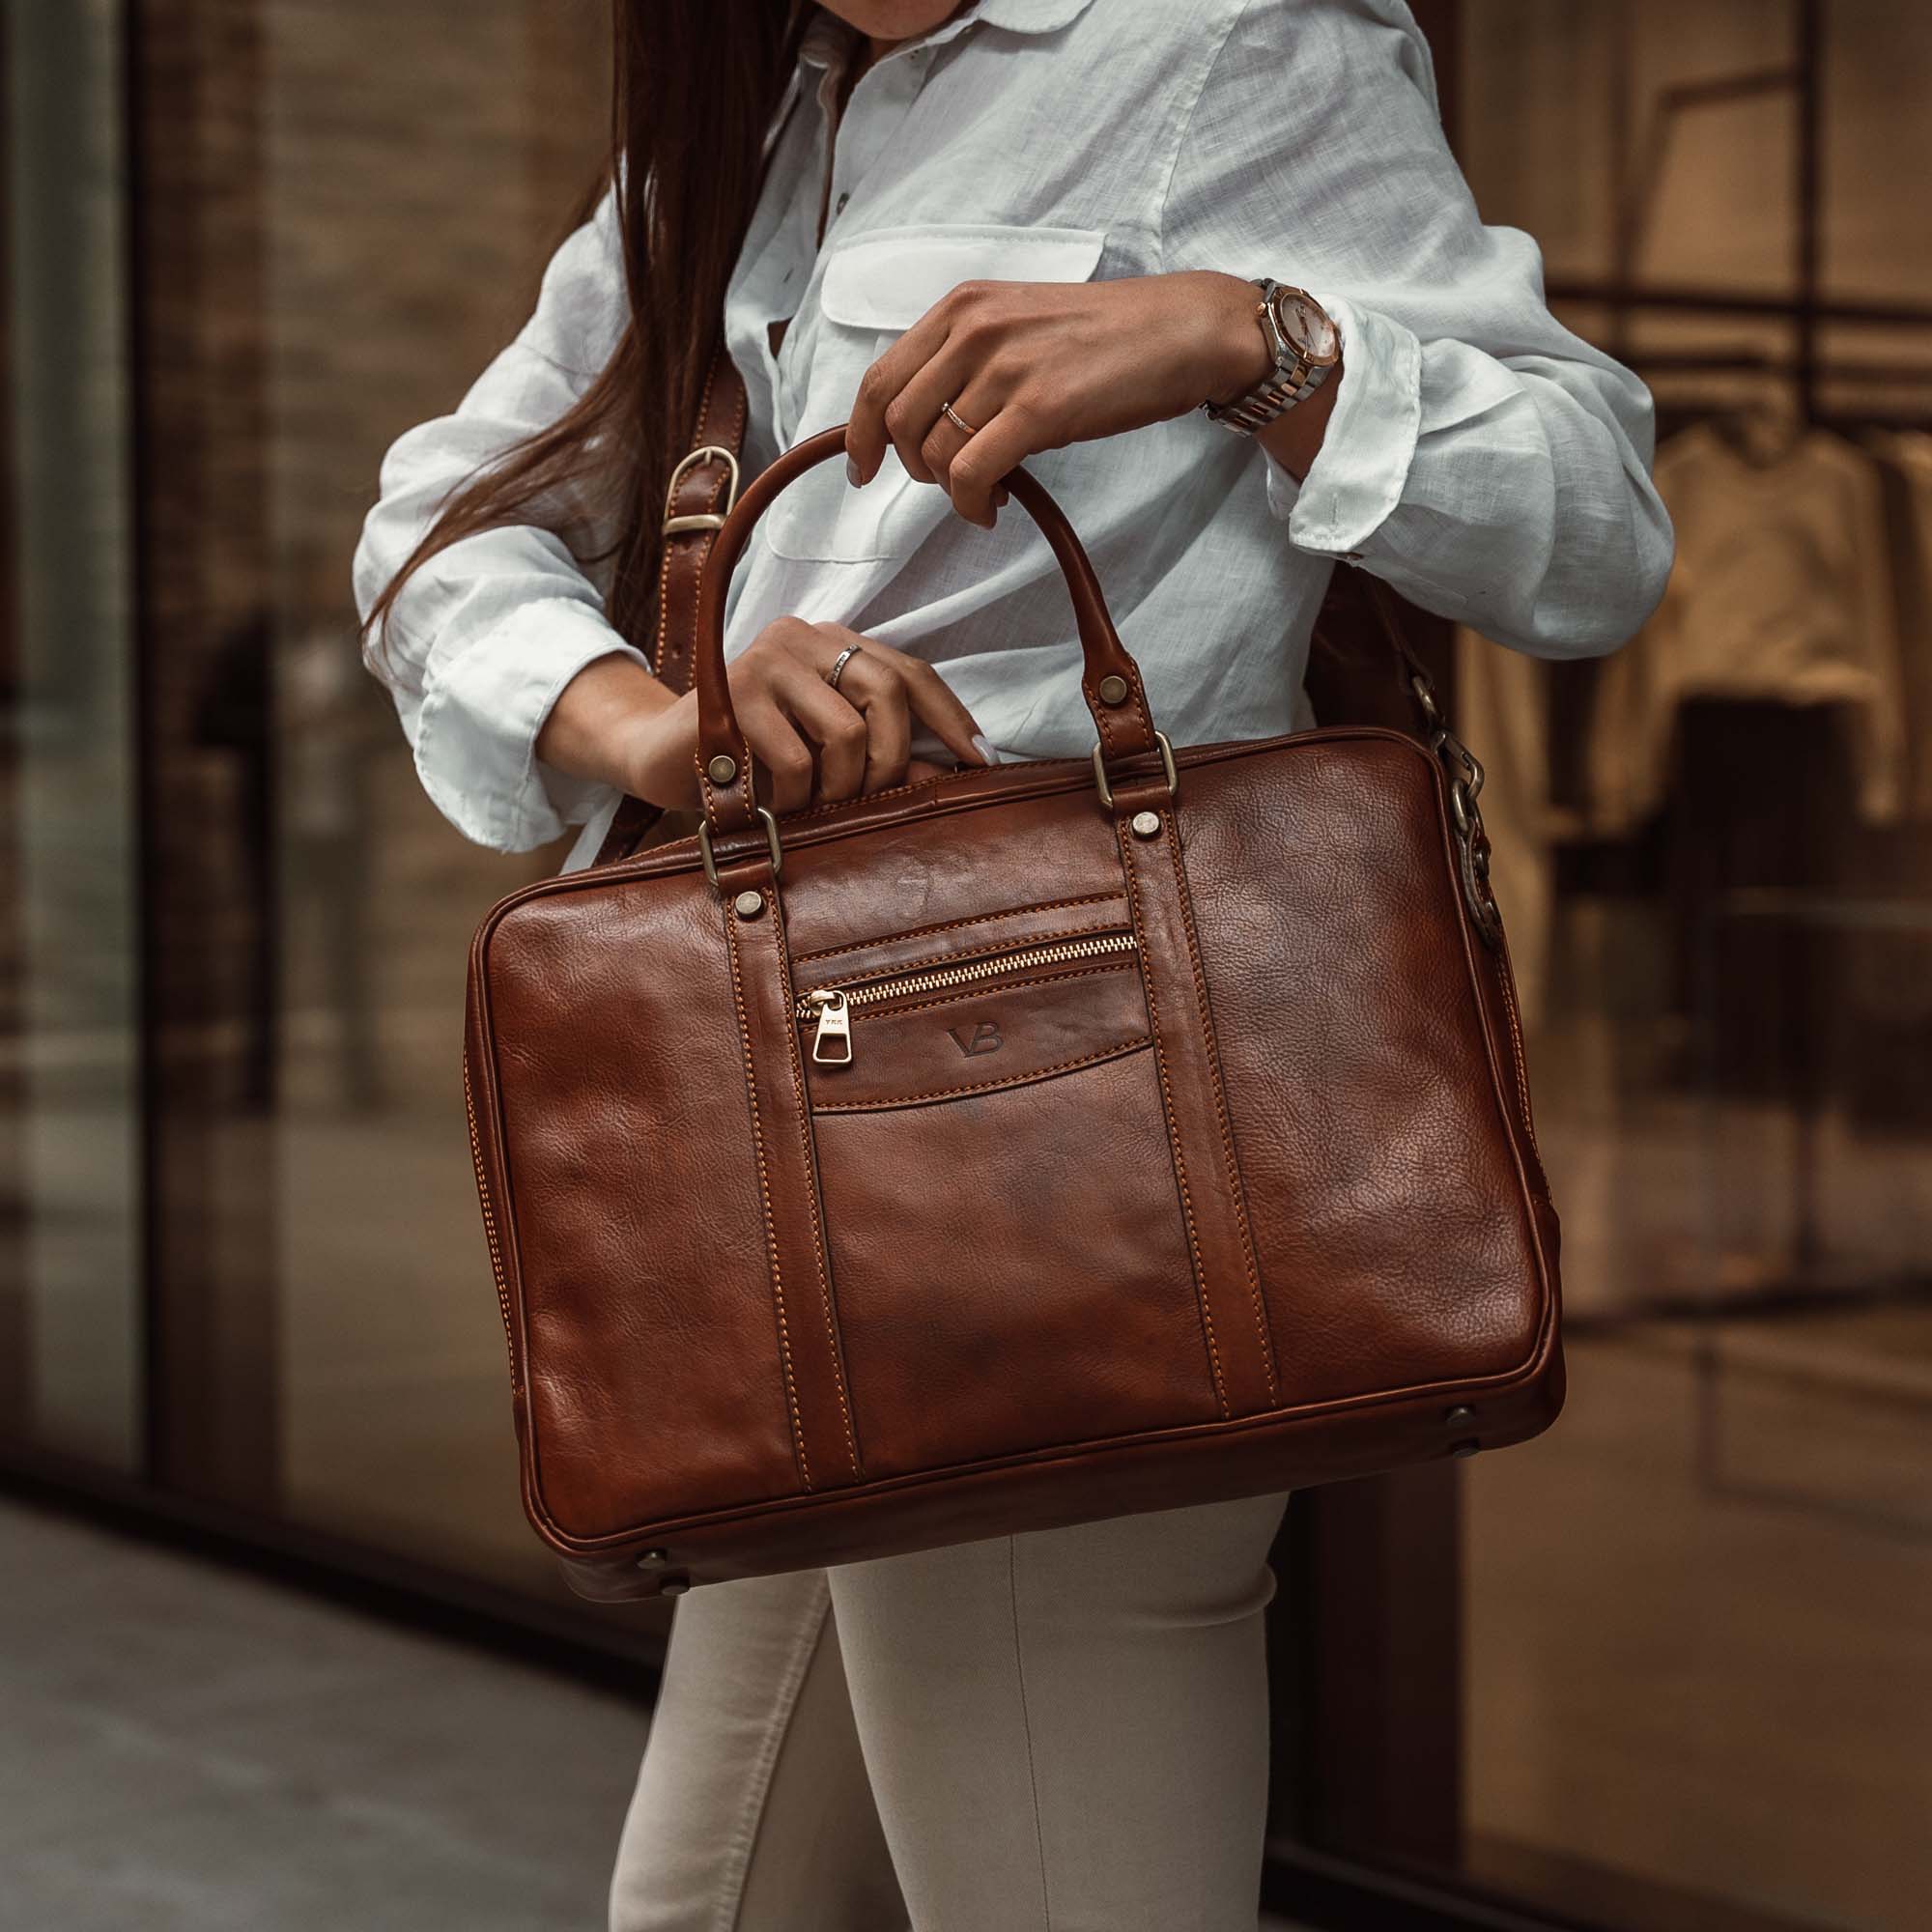 Women's leather work bags | Business bags & Office bags - Von Baer